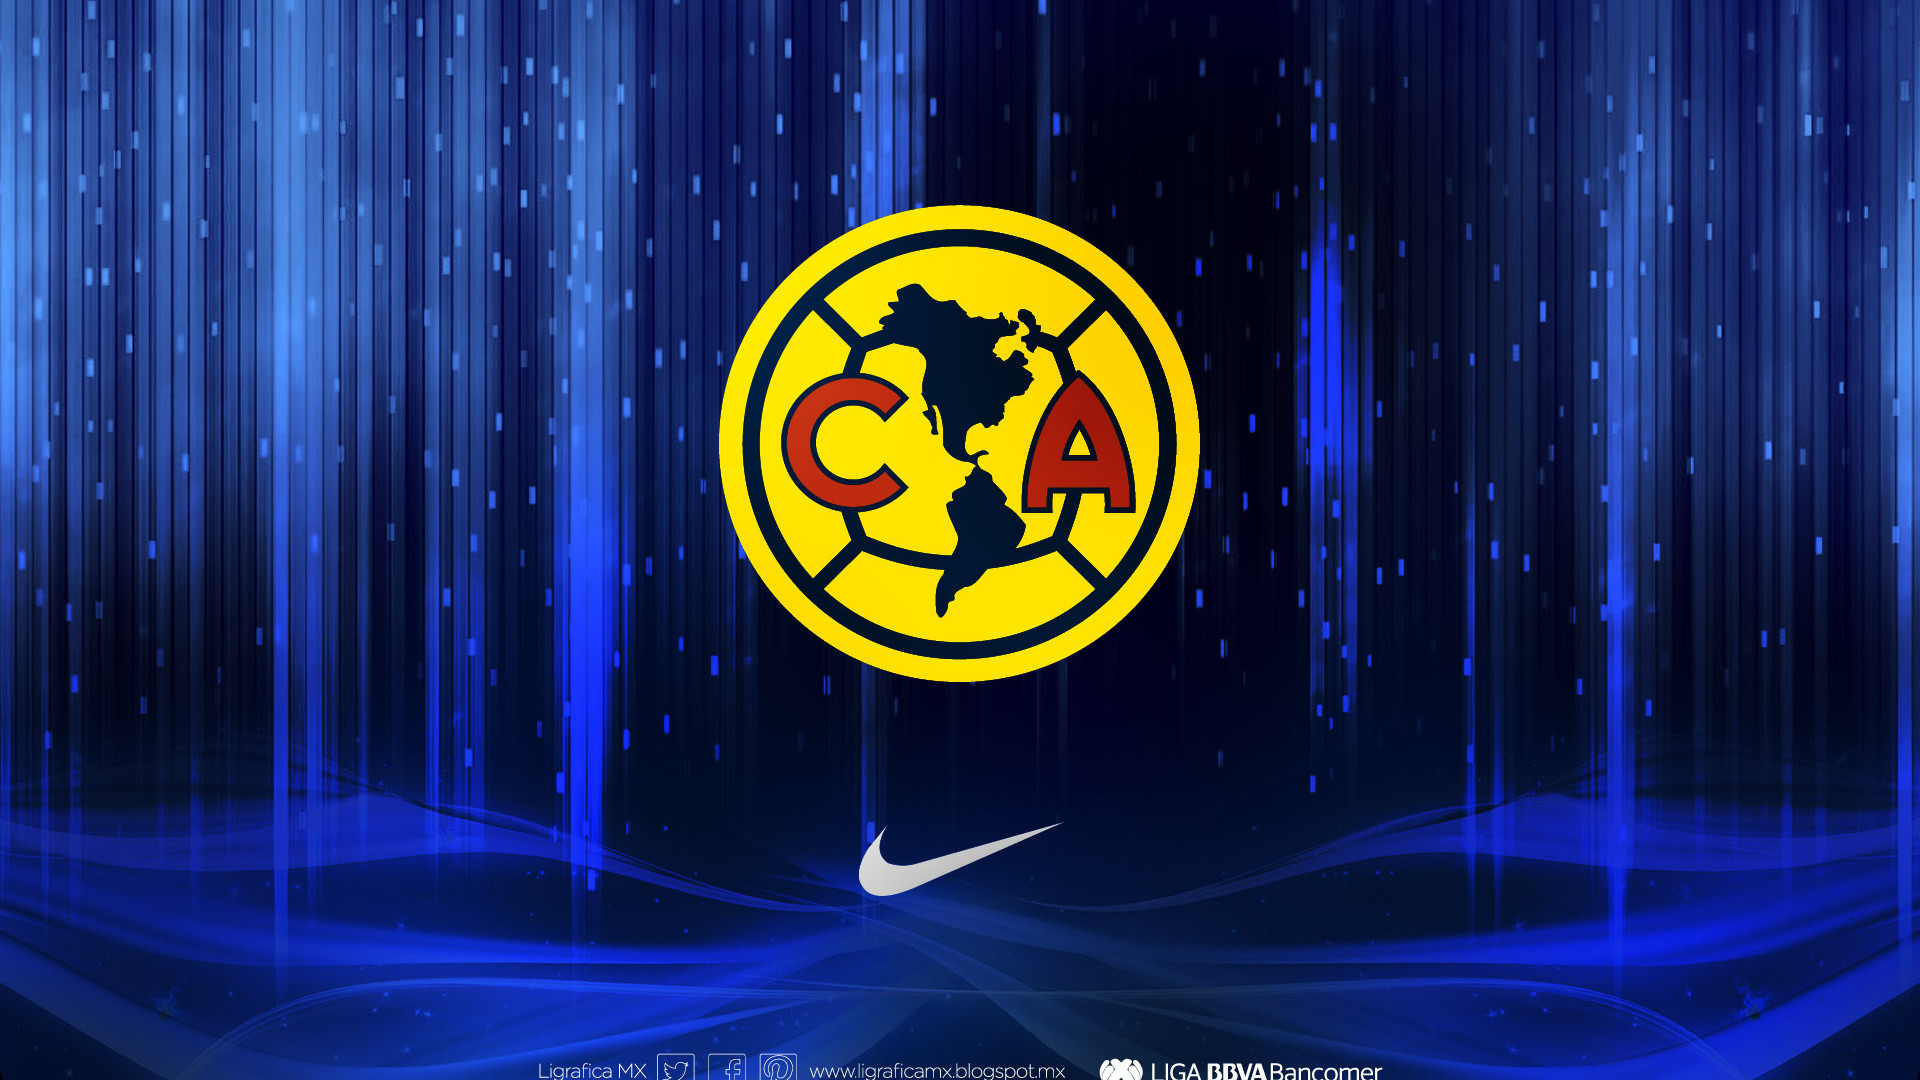 1920x1080 America Wallpapers Best HD Photos of America High Resolution | HD Wallpapers  | Pinterest | Wallpaper and Club america